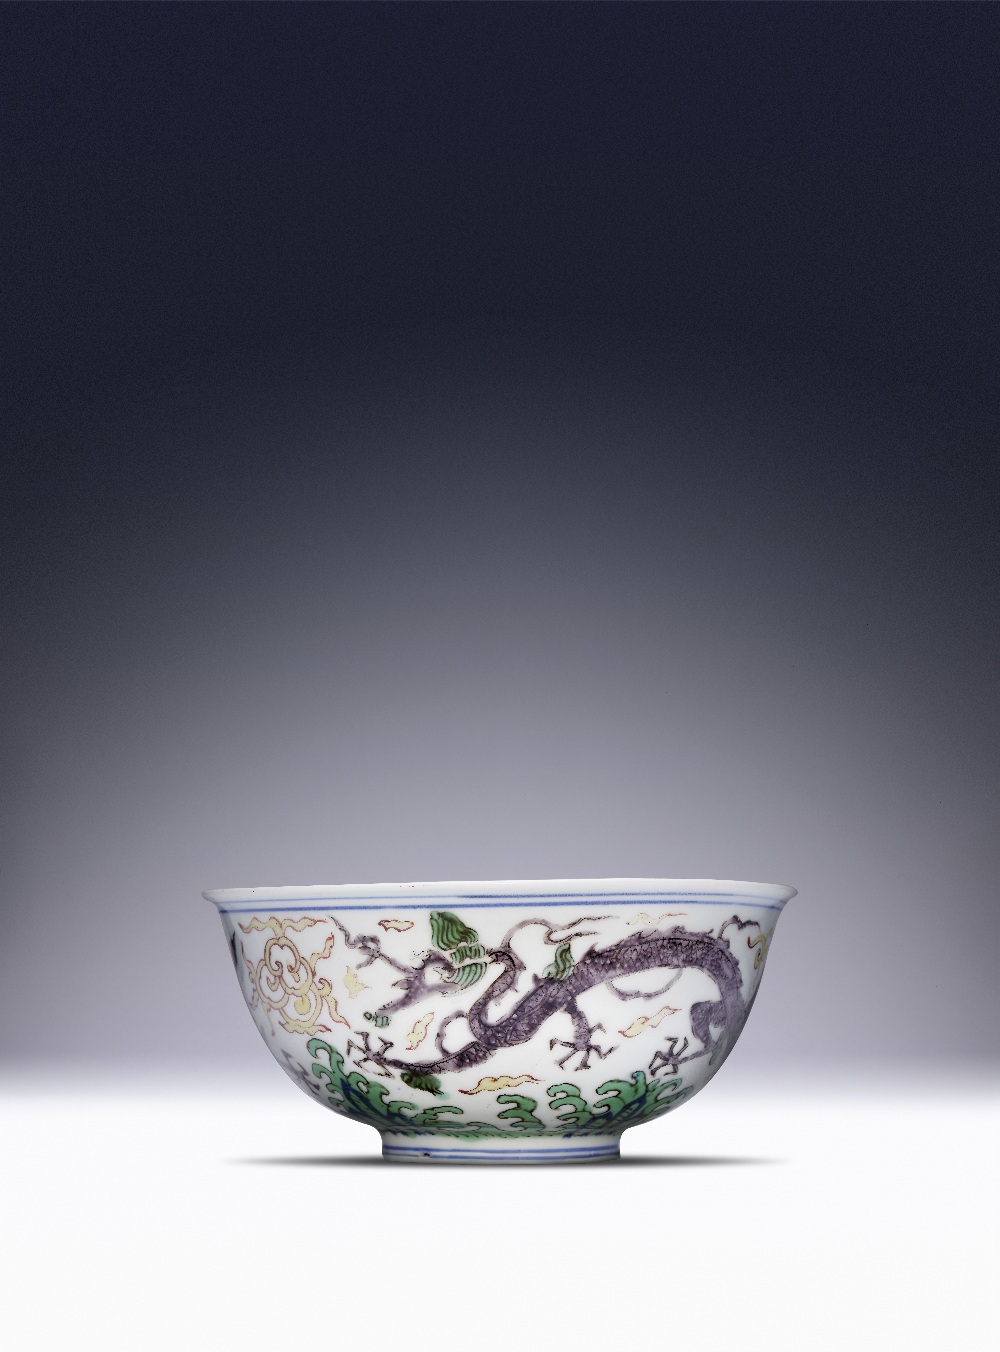 A VERY RARE CHINESE WUCAI DRAGON BOWL SIX CHARACTER JIAJING MARK AND OF THE PERIOD 1525-66 The